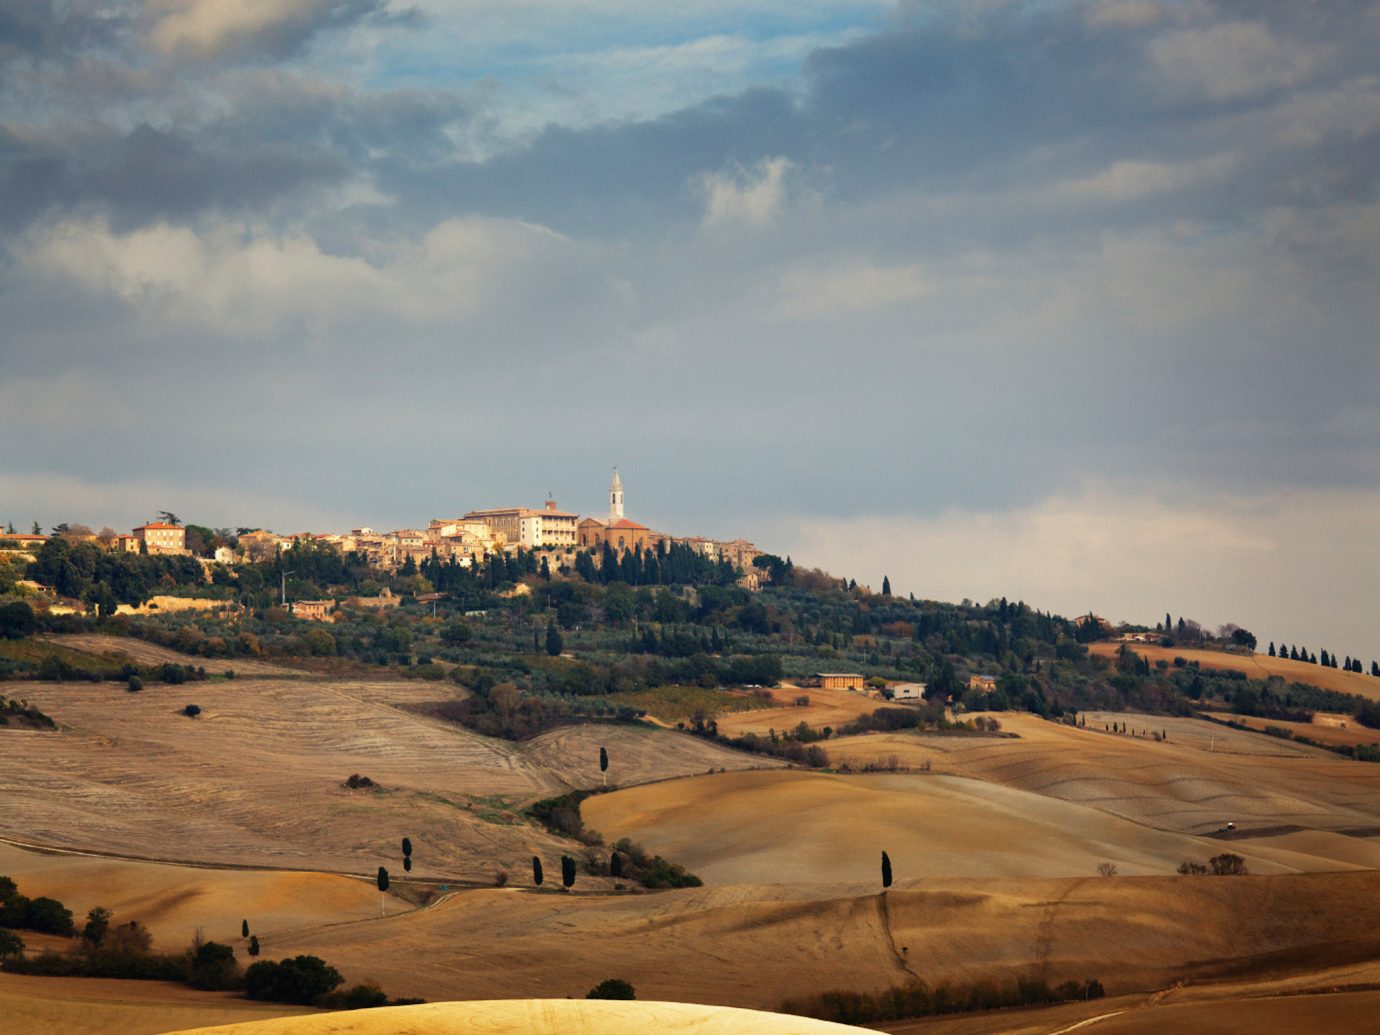 Country Italy Scenic views Trip Ideas sky outdoor cloud horizon natural environment Nature Sea plain Coast hill sand atmosphere of earth landscape Sunset morning dusk evening Beach rural area dawn aeolian landform Desert sunlight meteorological phenomenon clouds cloudy shore day sandy dune soil